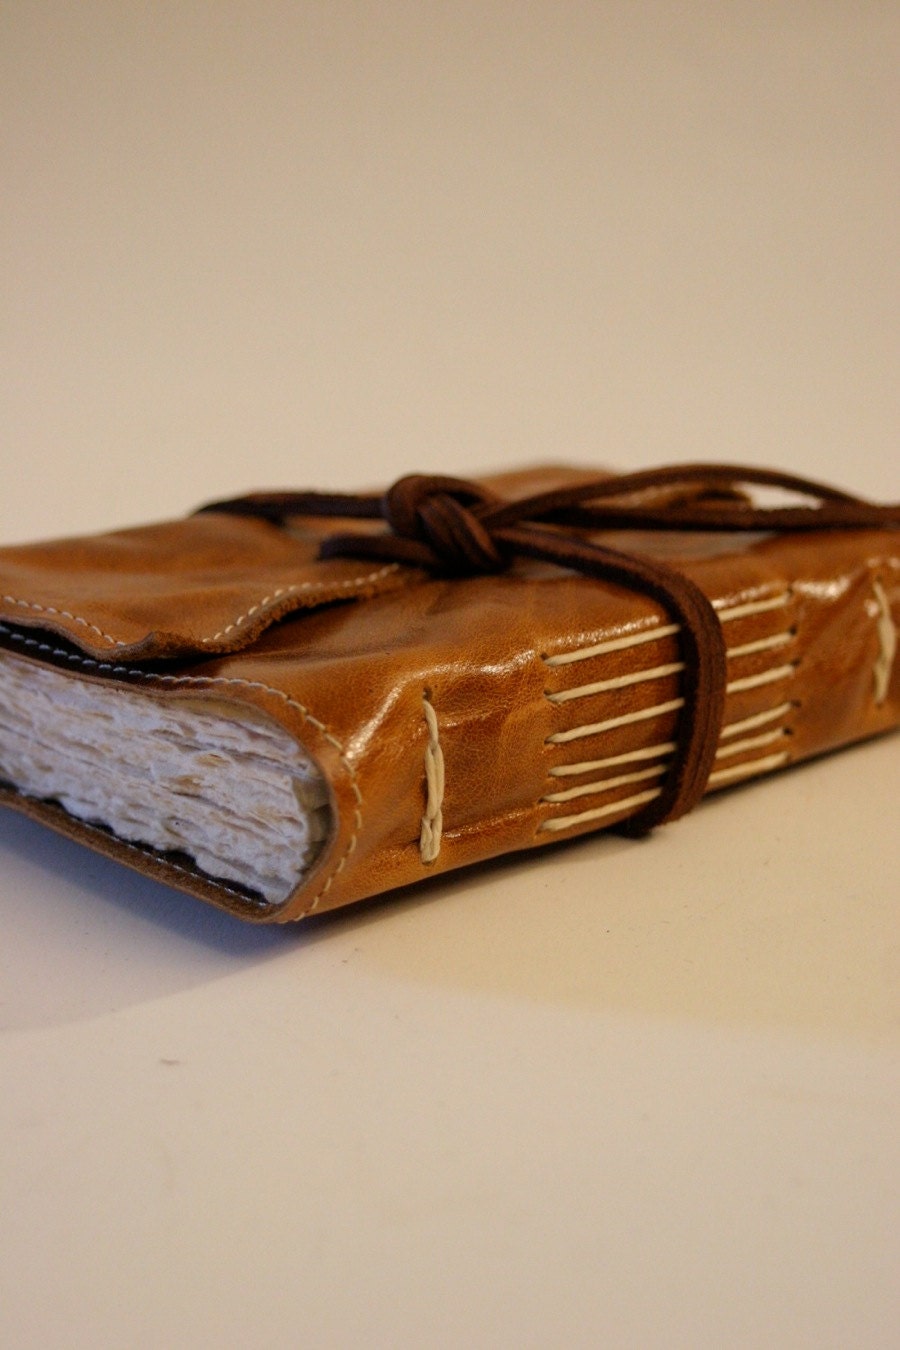 Light Brown Old Fashion Leather Journal by Binding by bindingbee